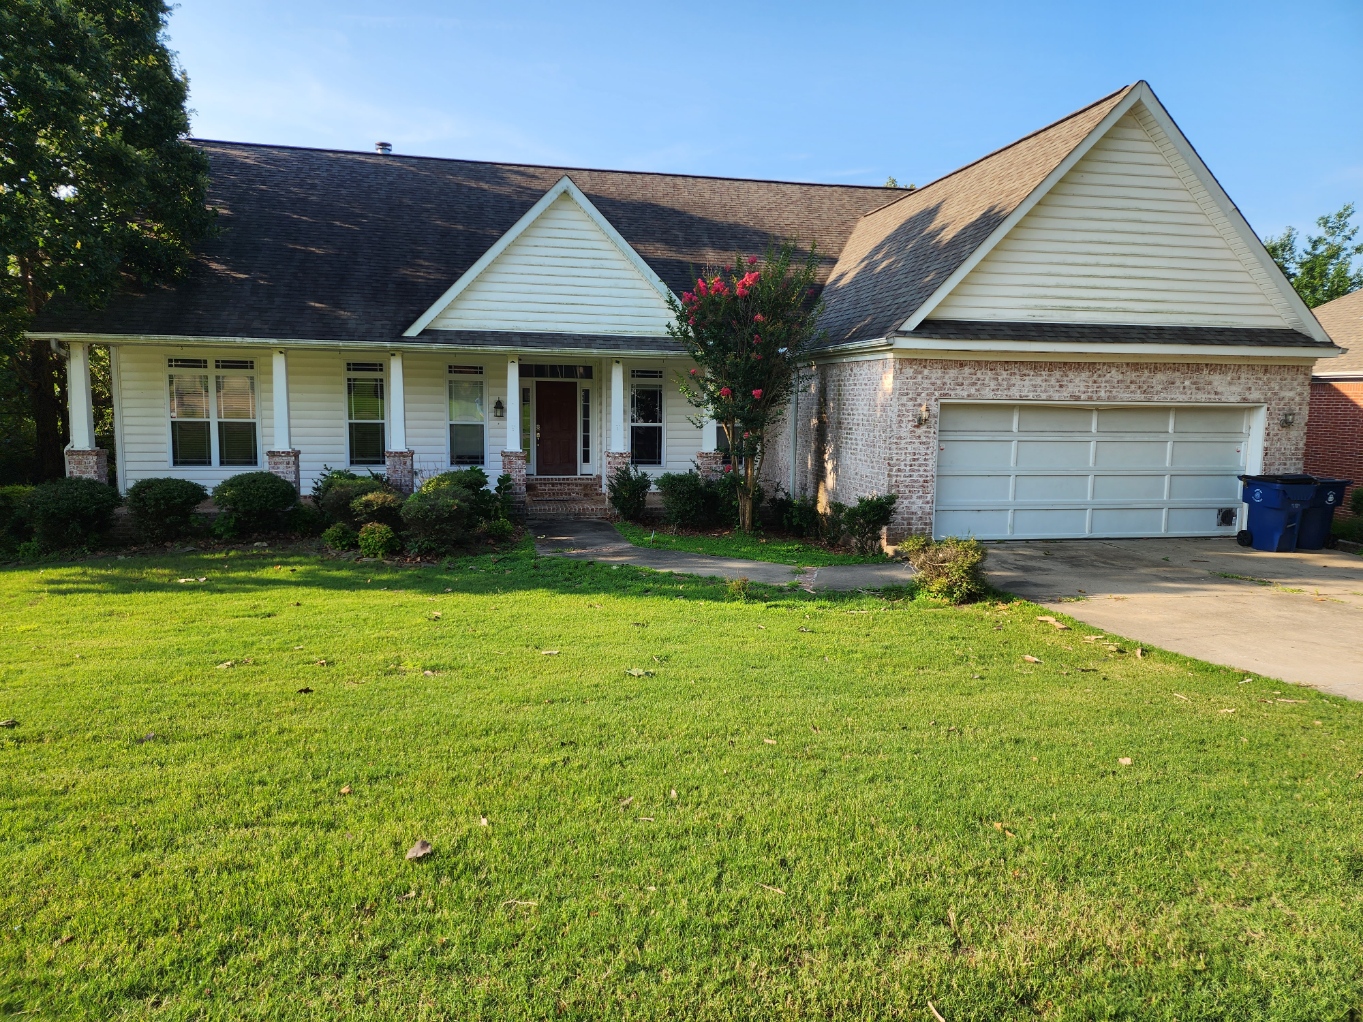 Professional home exterior cleaning service in Maumelle, Arkansas.